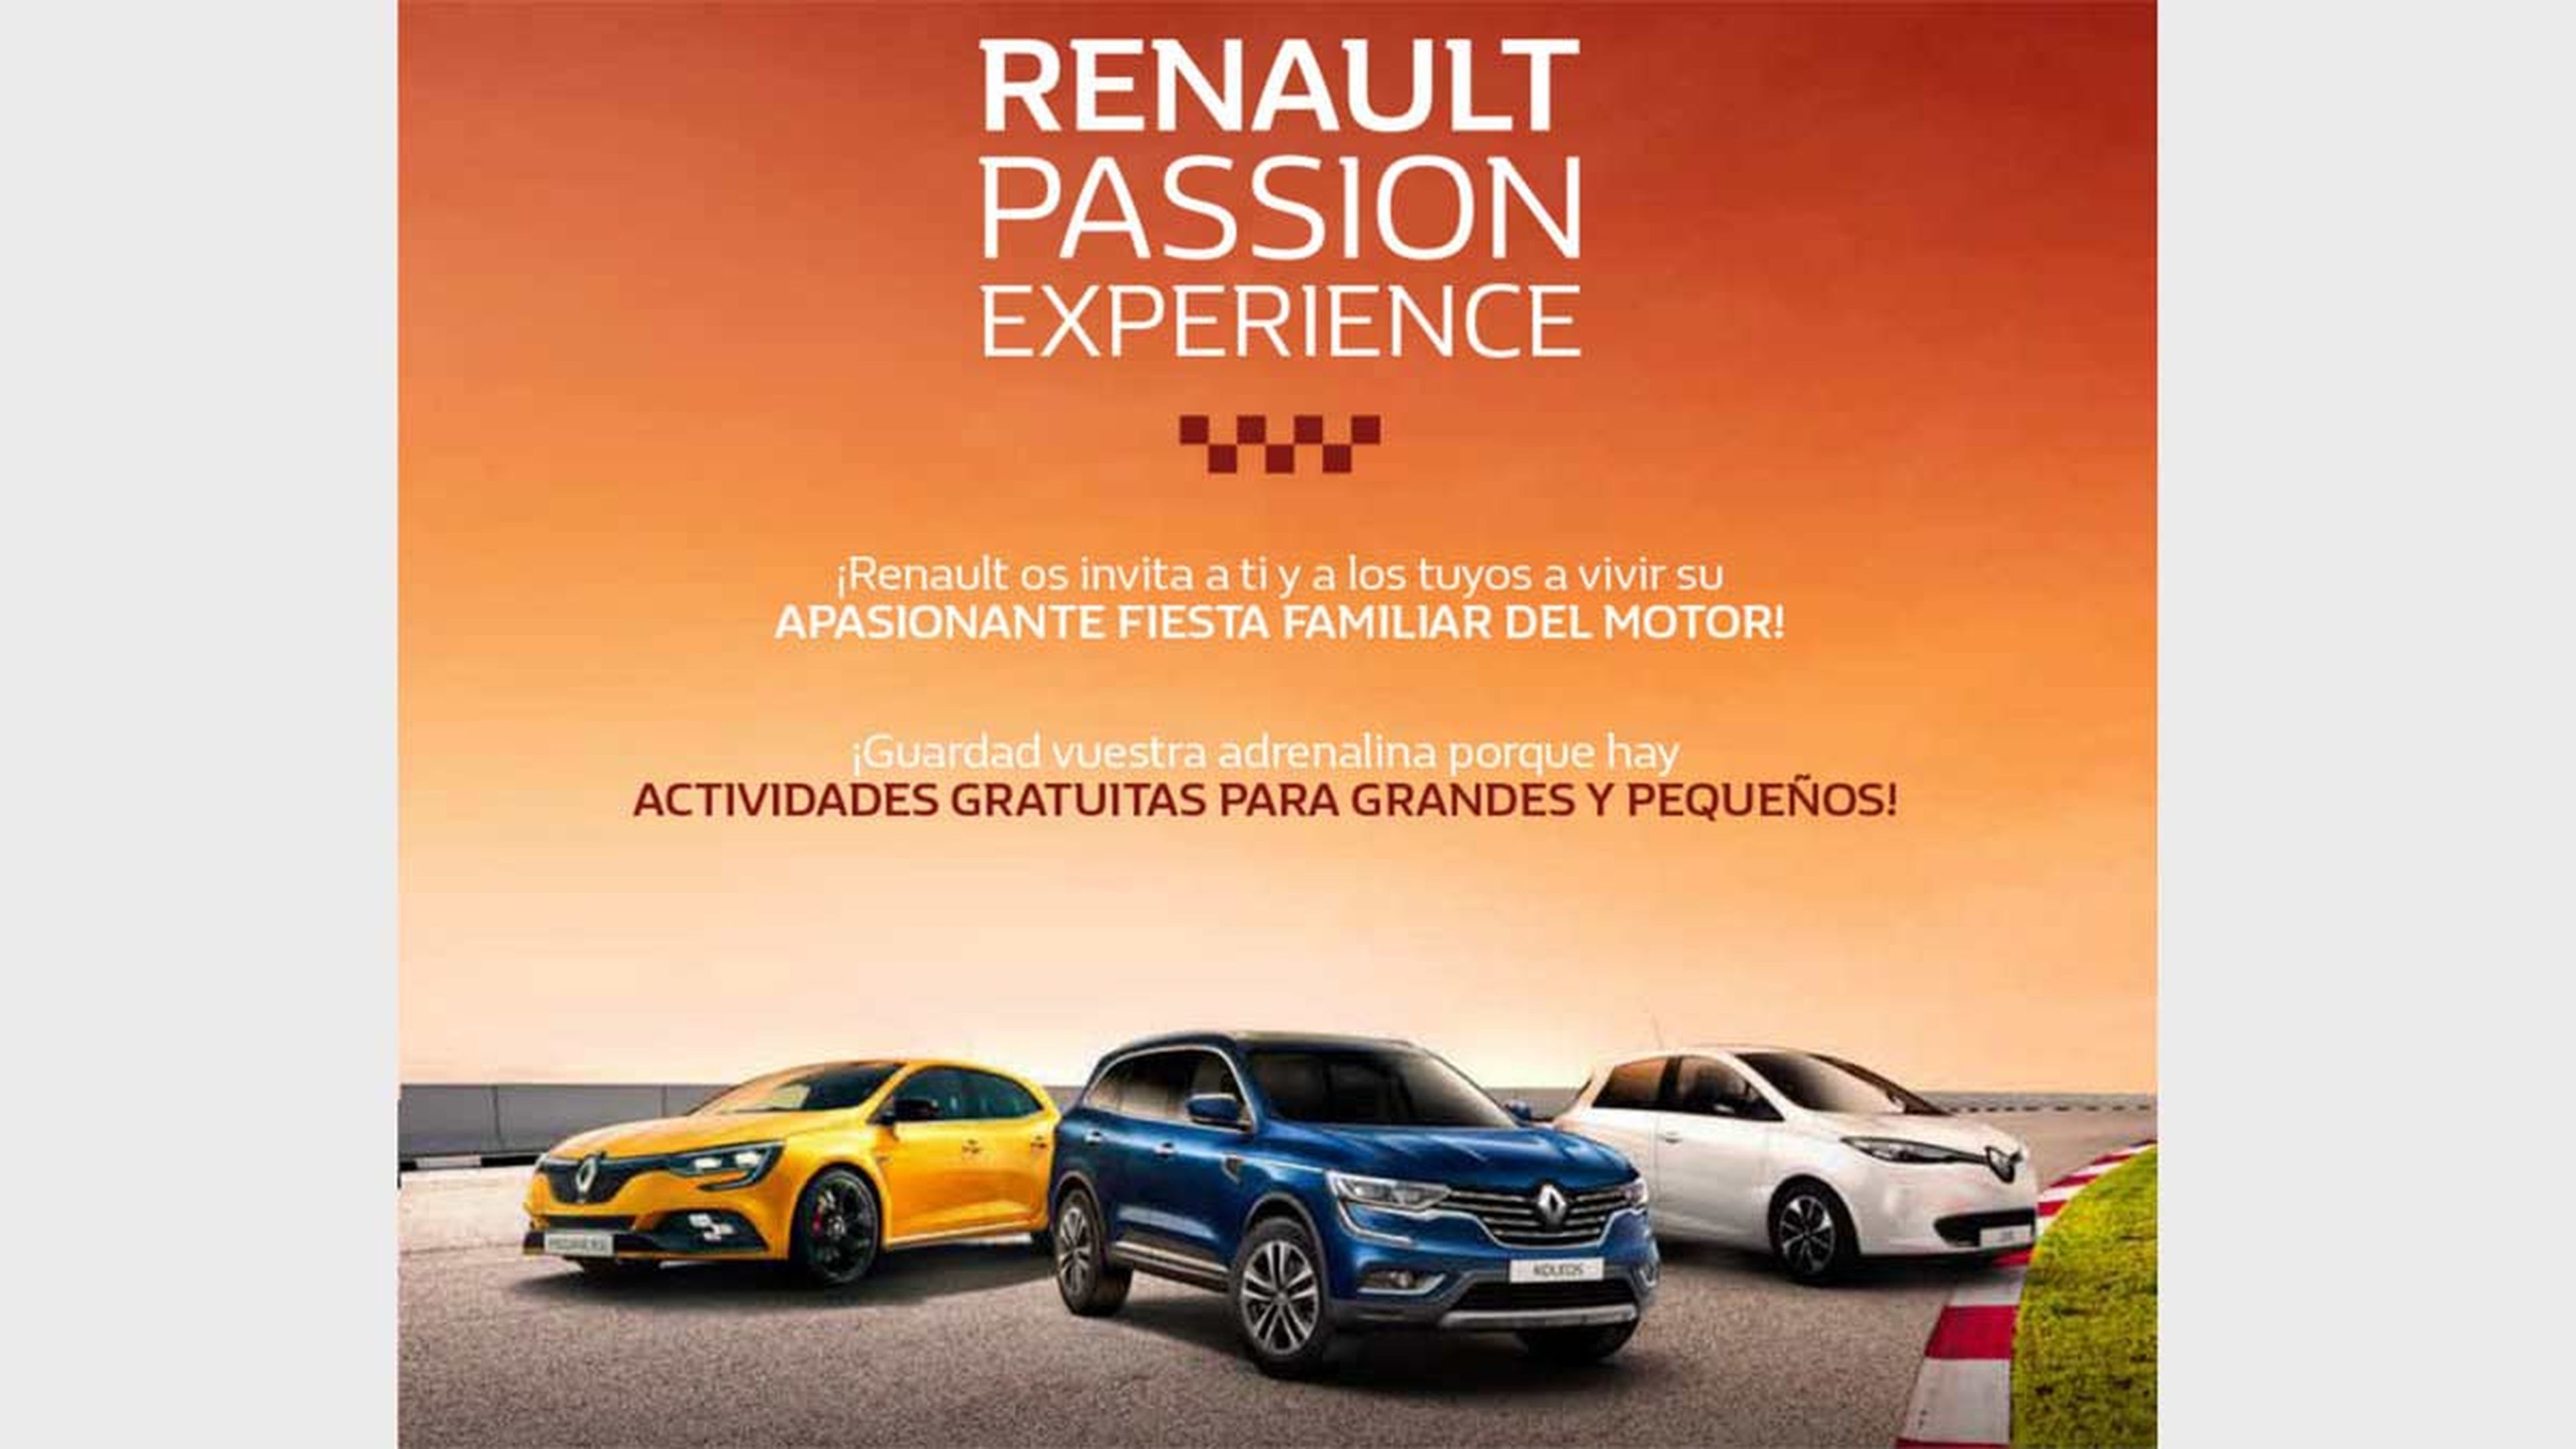 Renault Passion Experience